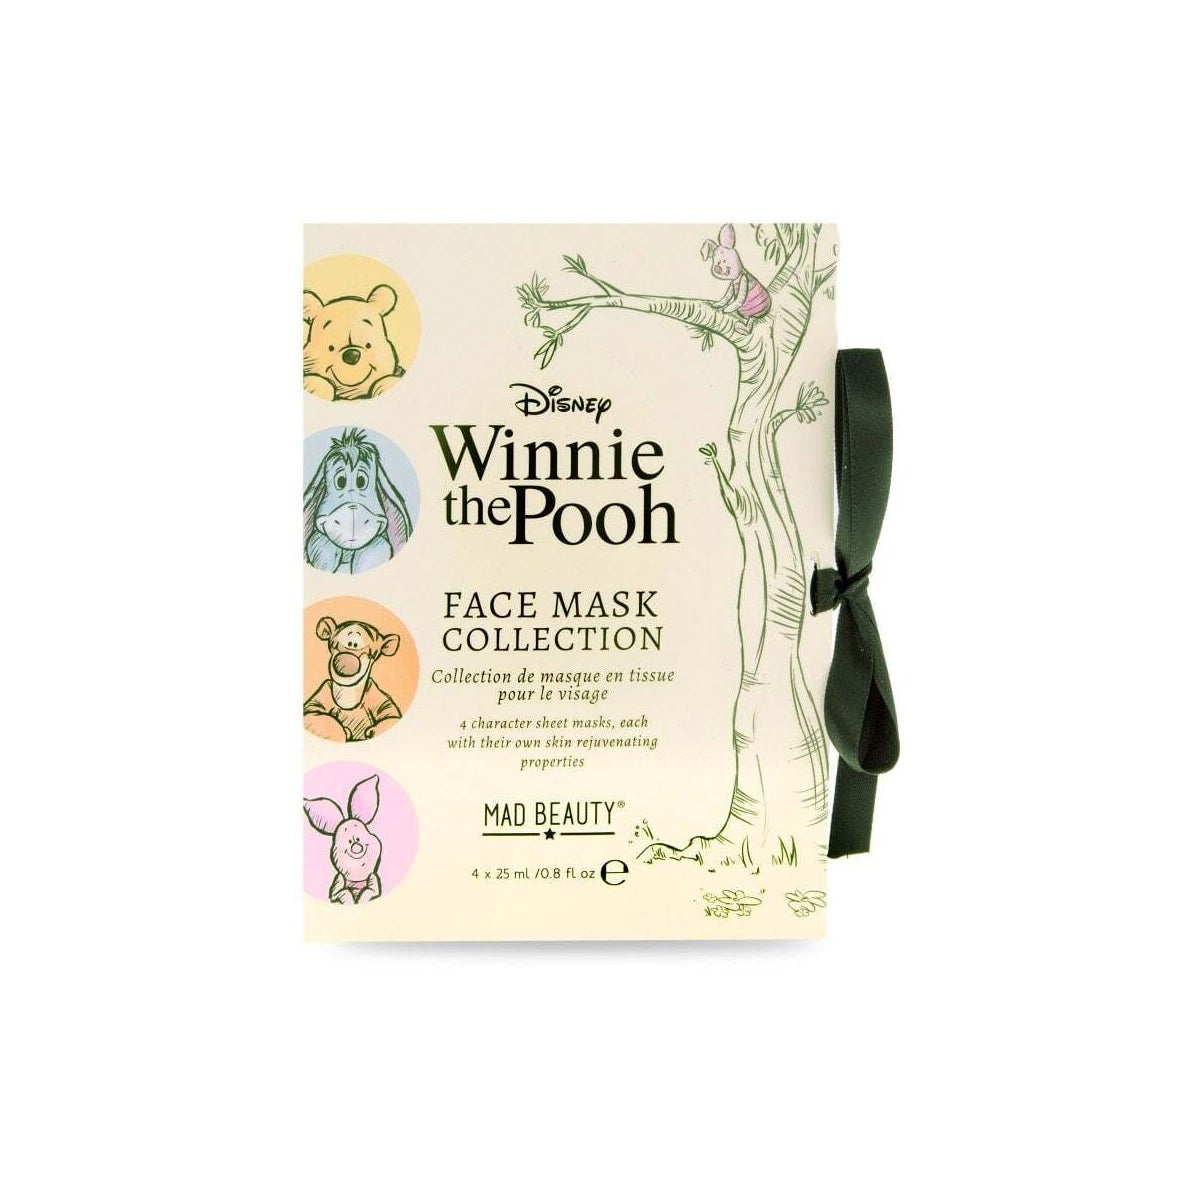 Disney Winnie the Pooh - Cosmetic Sheet Mask Collection